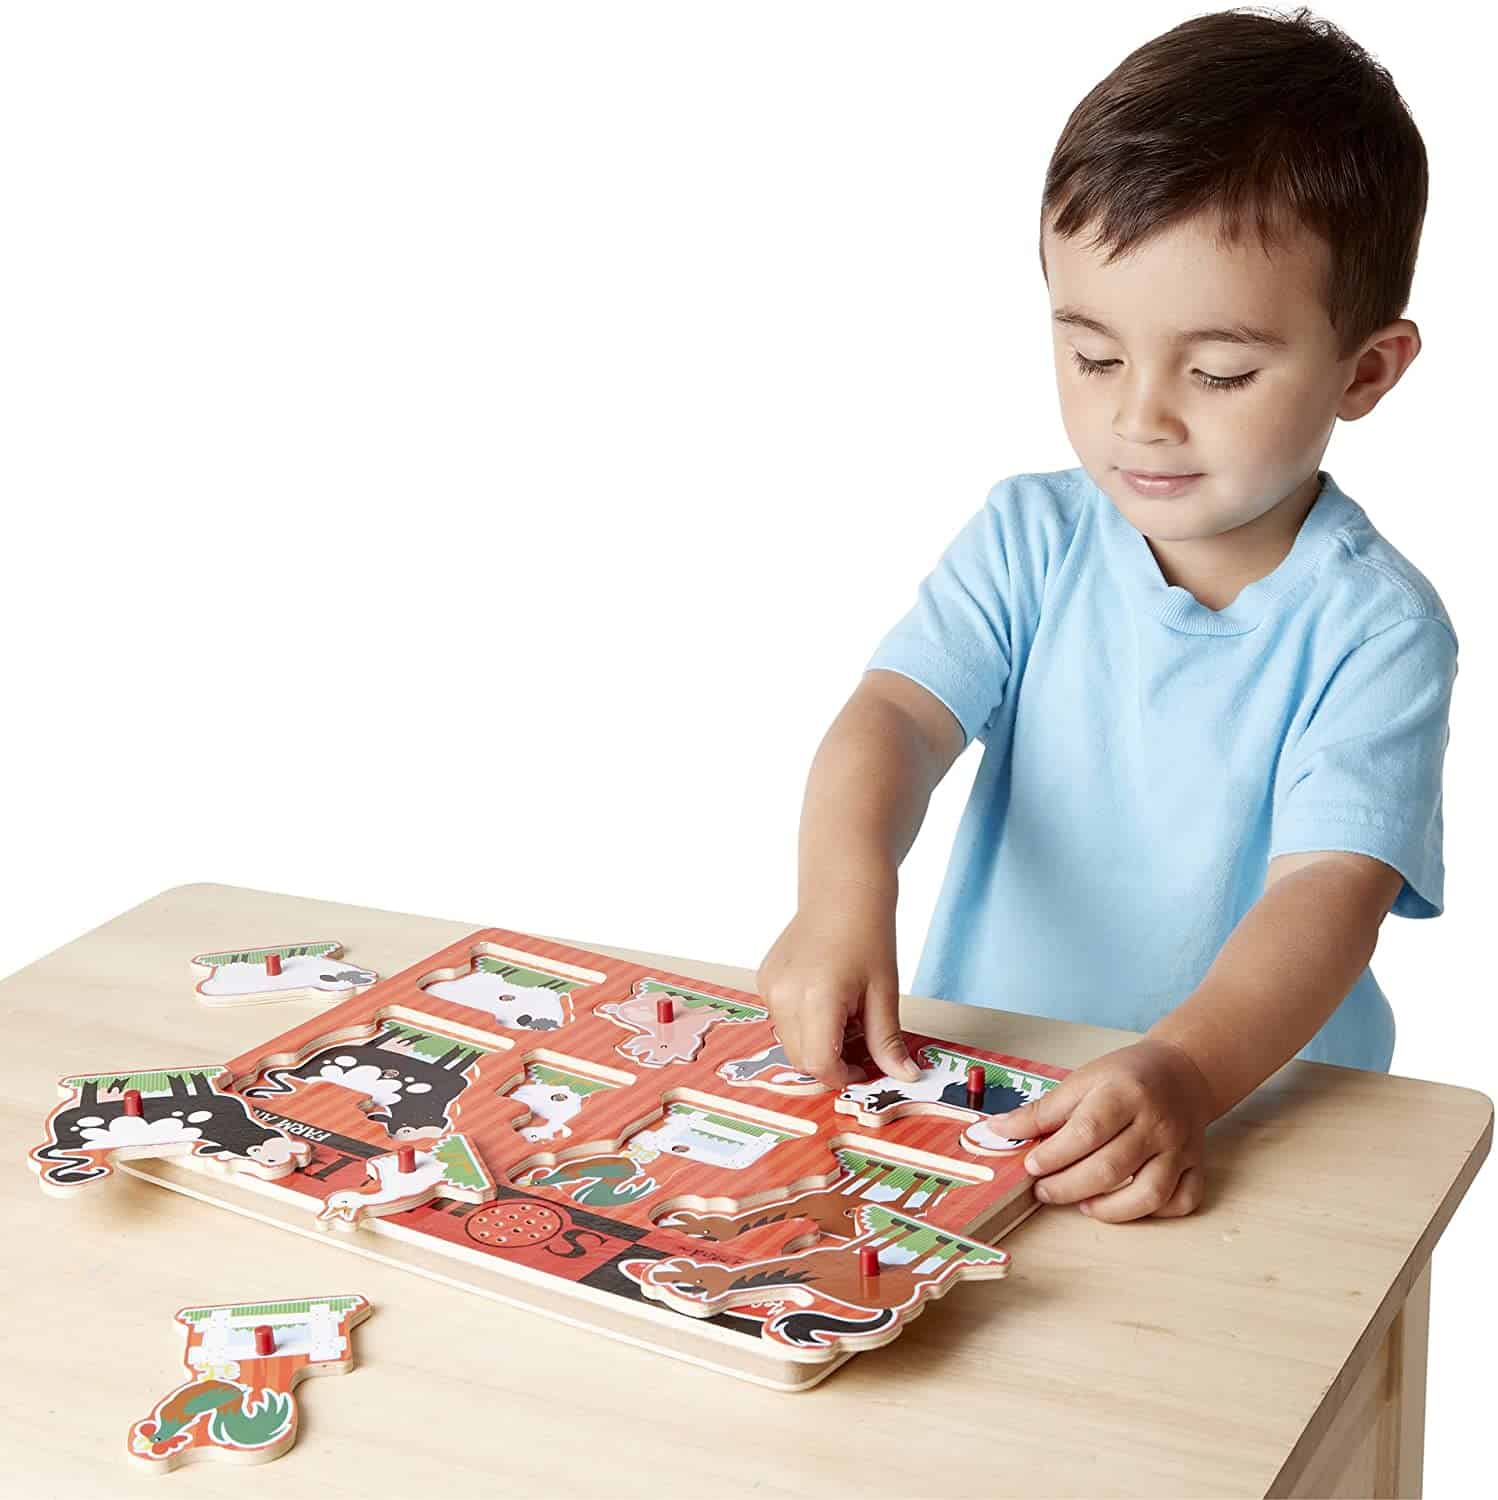 Best from 2 years old: Melissa & Doug sounds farm animal shapes puzzle